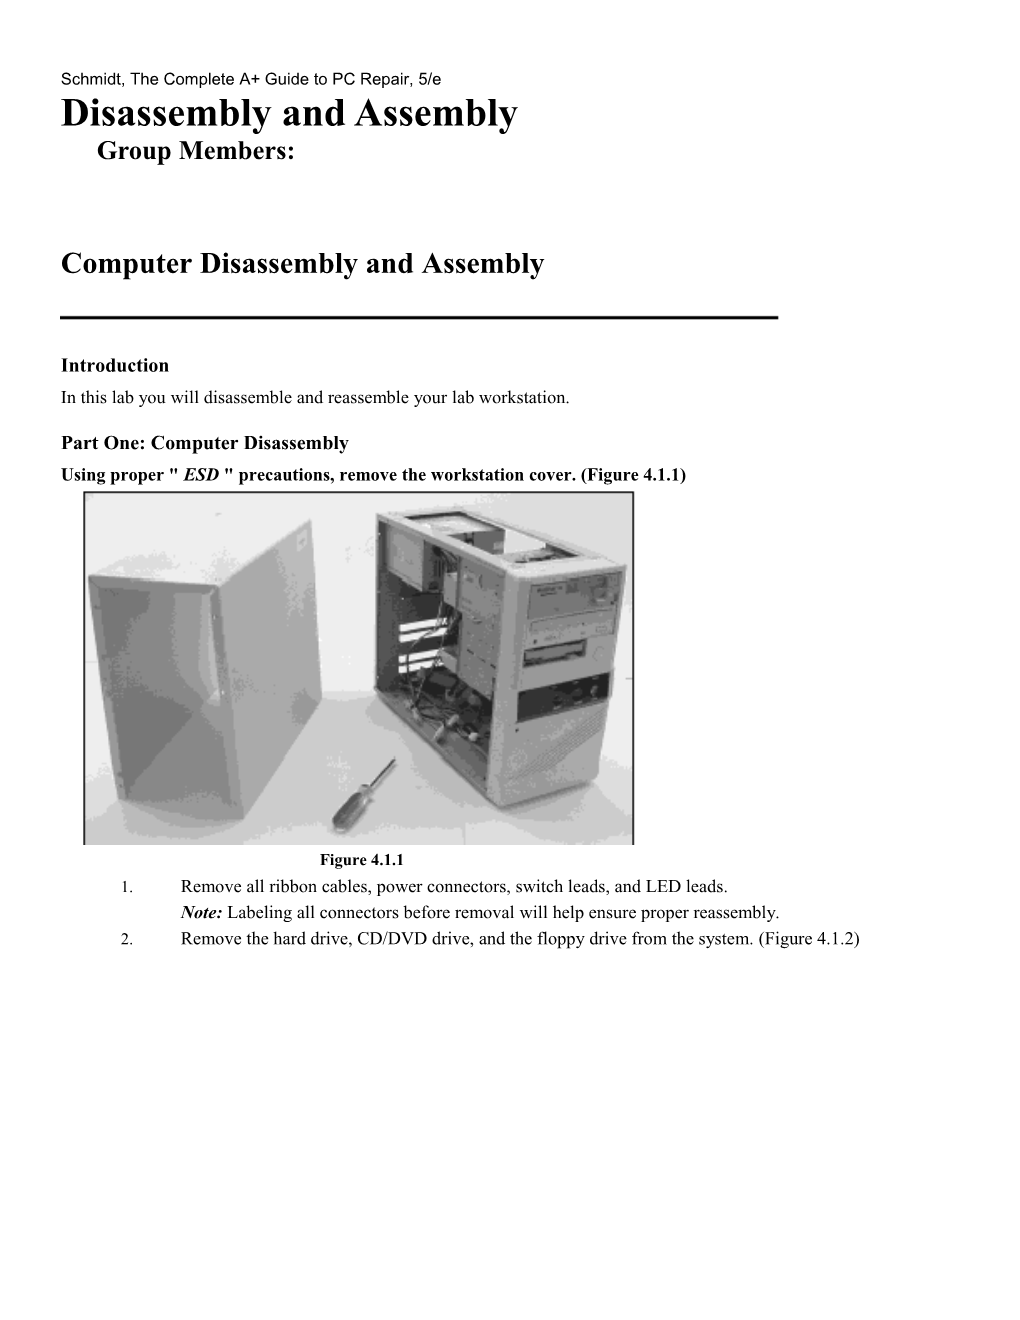 Schmidt, the Complete A+ Guide to PC Repair, 5/E